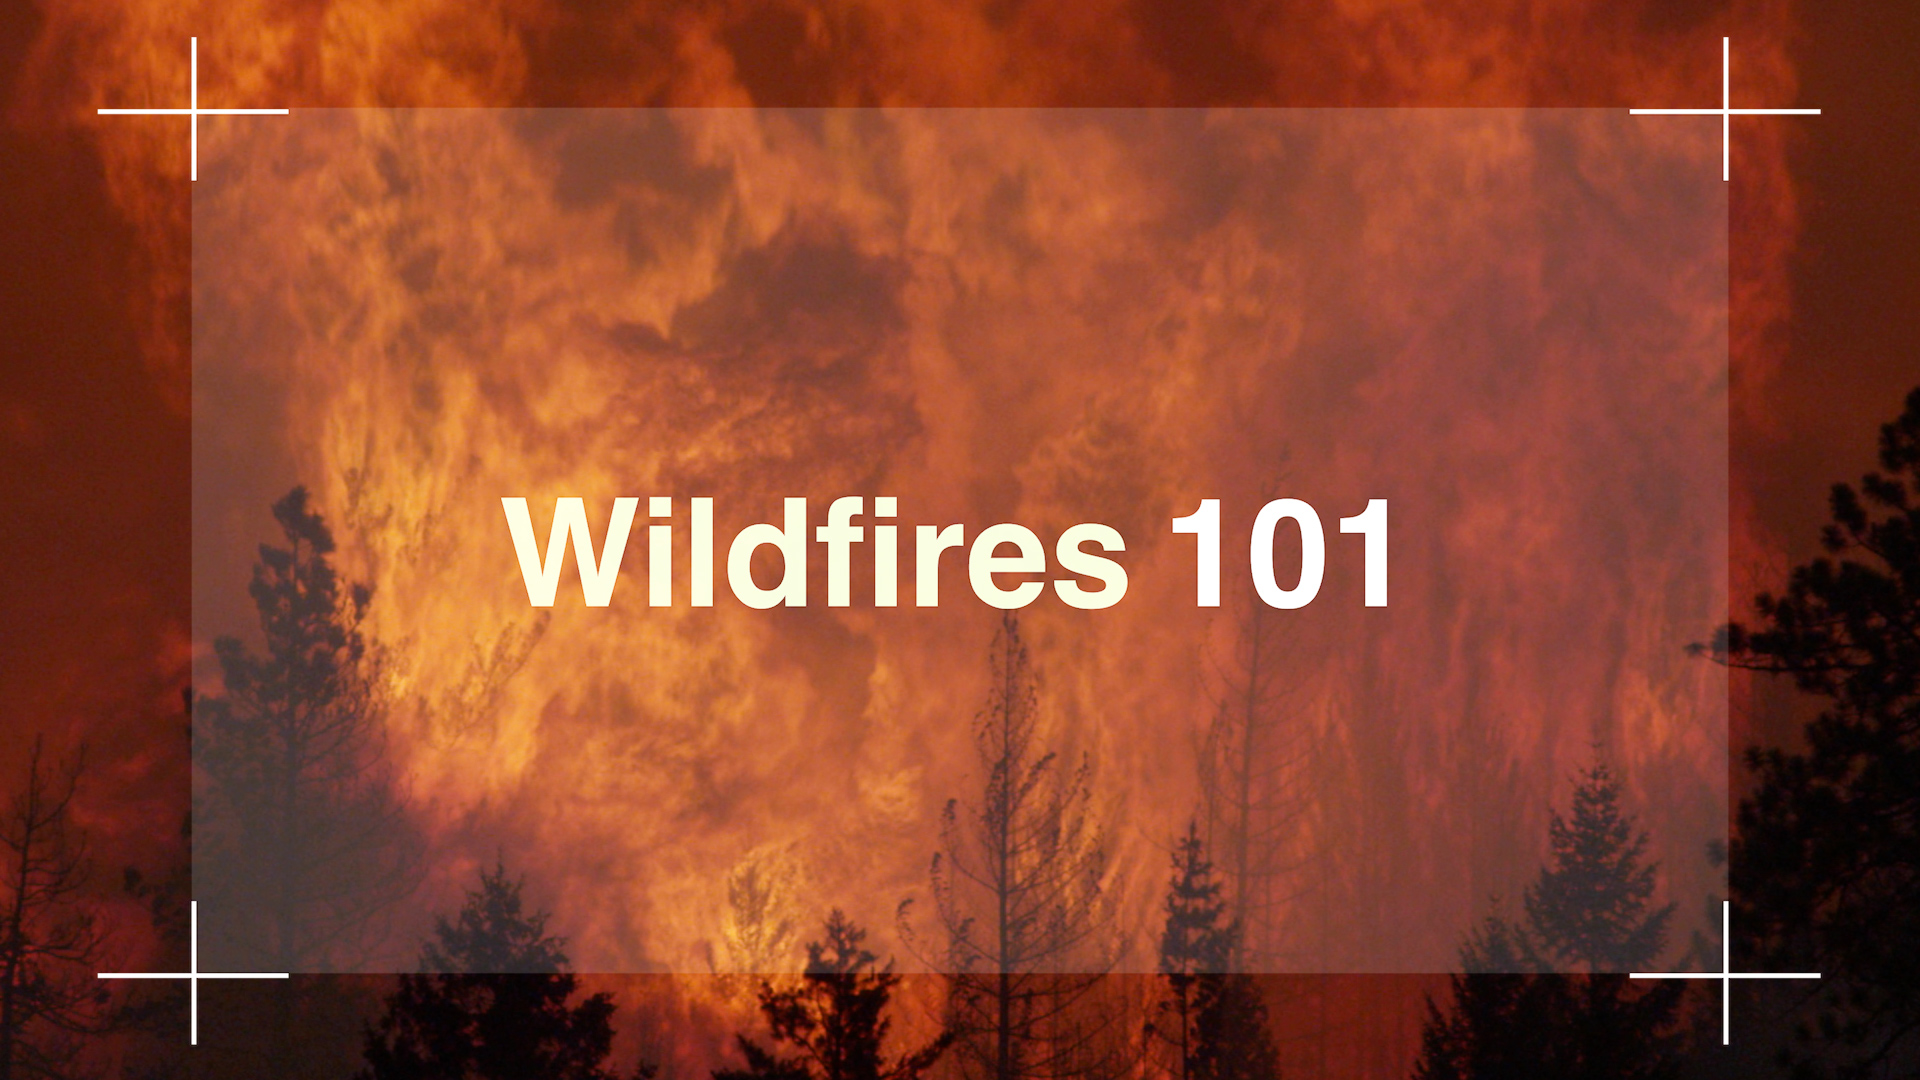 Preview Image for Wildfires101: How NASA Studies Fires in a Changing World